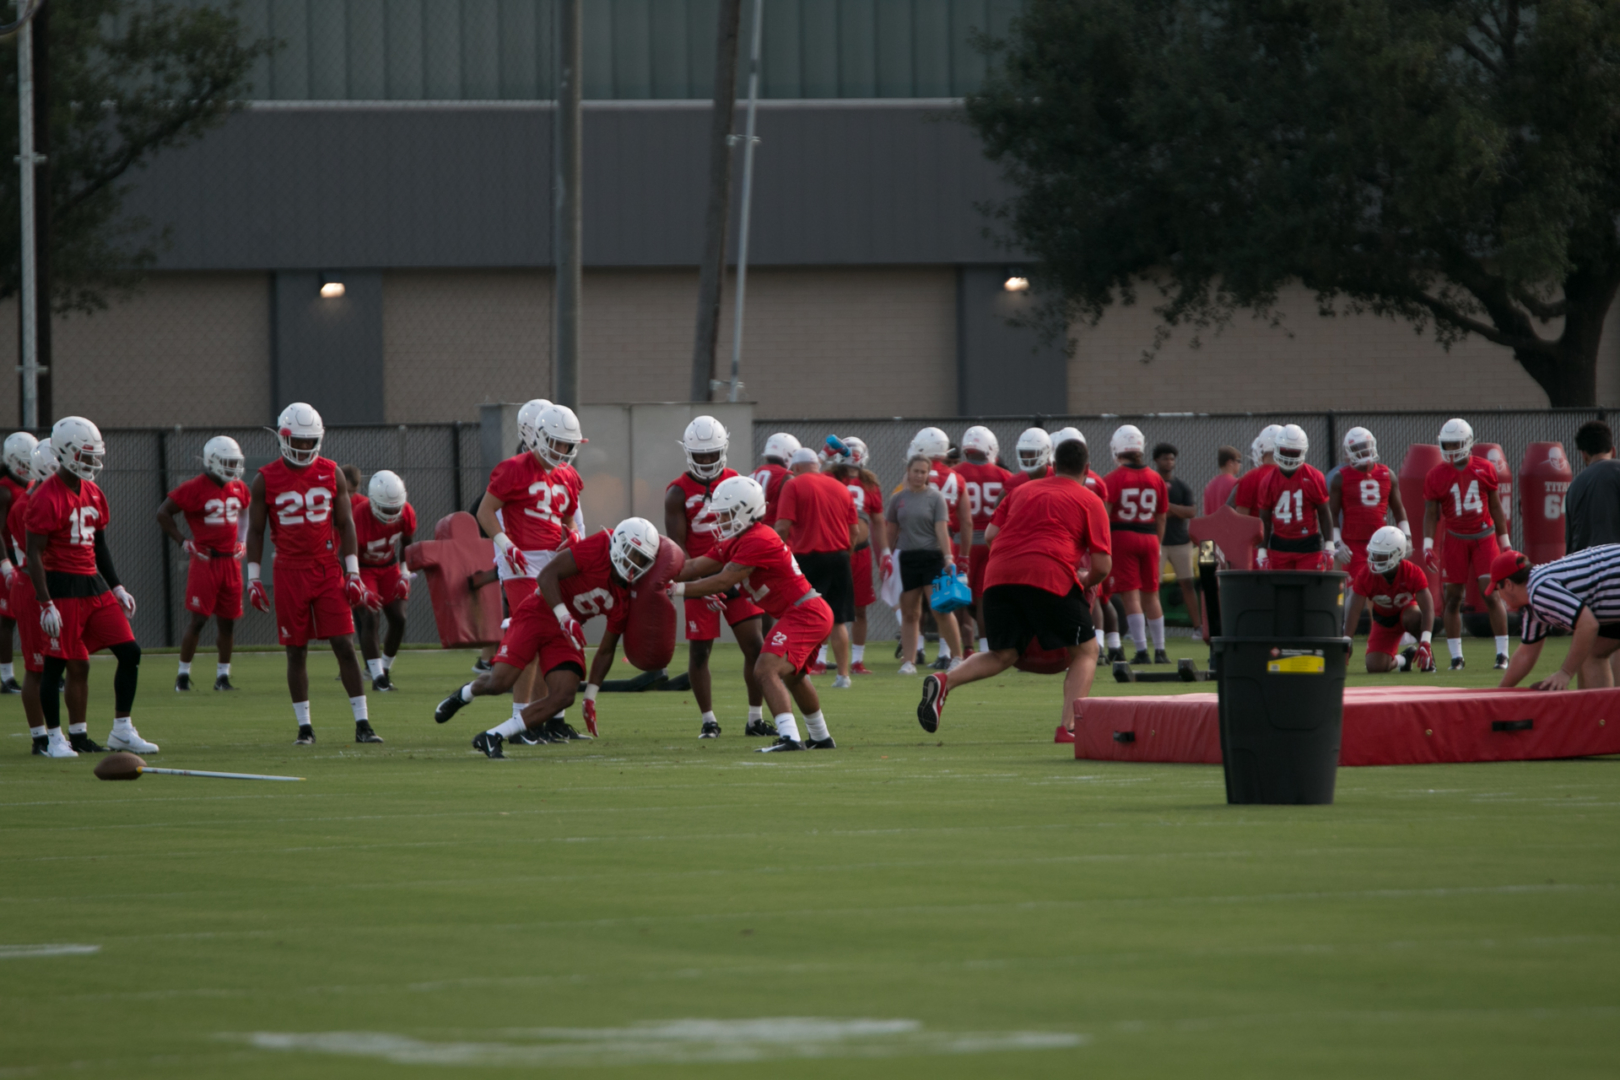 The UH football continues to practice despite already having five games postponed or canceled this season. | Kathryn Lenihan/The Cougar